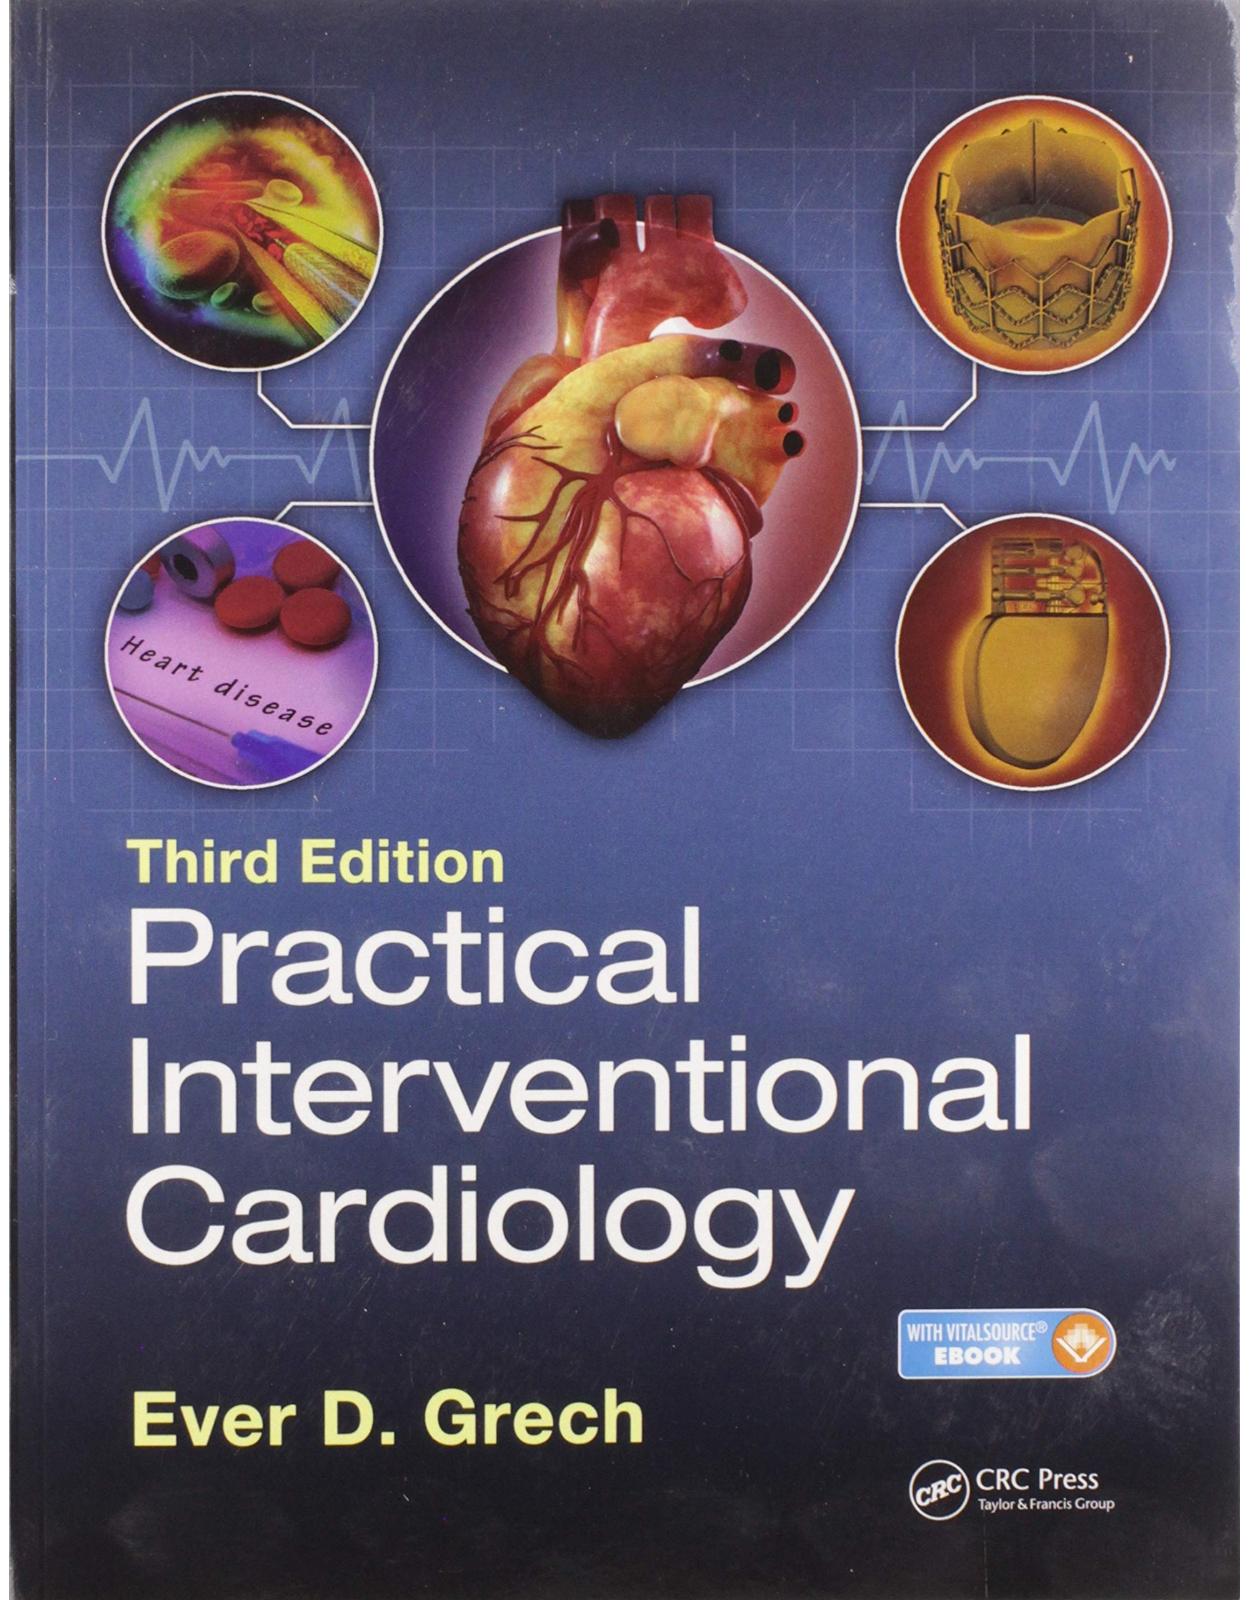 Practical Interventional Cardiology: Third Edition